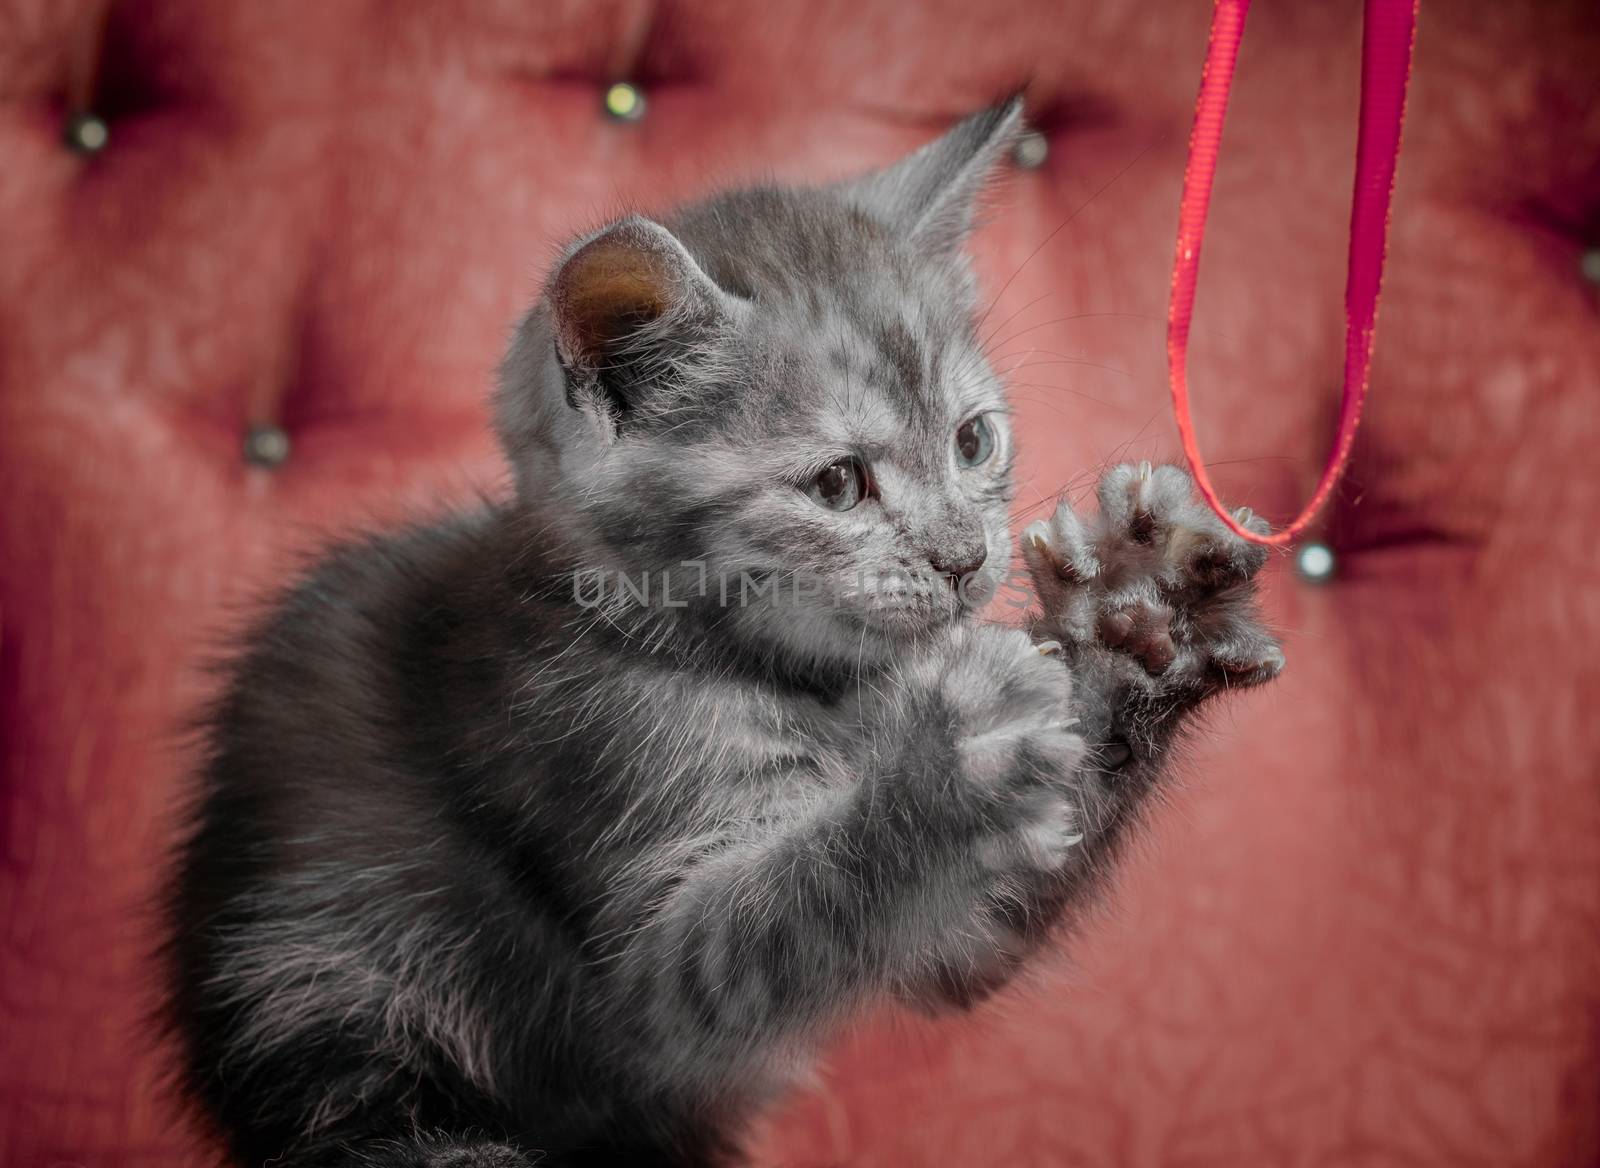 gray outbred kitten on a red sofa plays with a ribbon